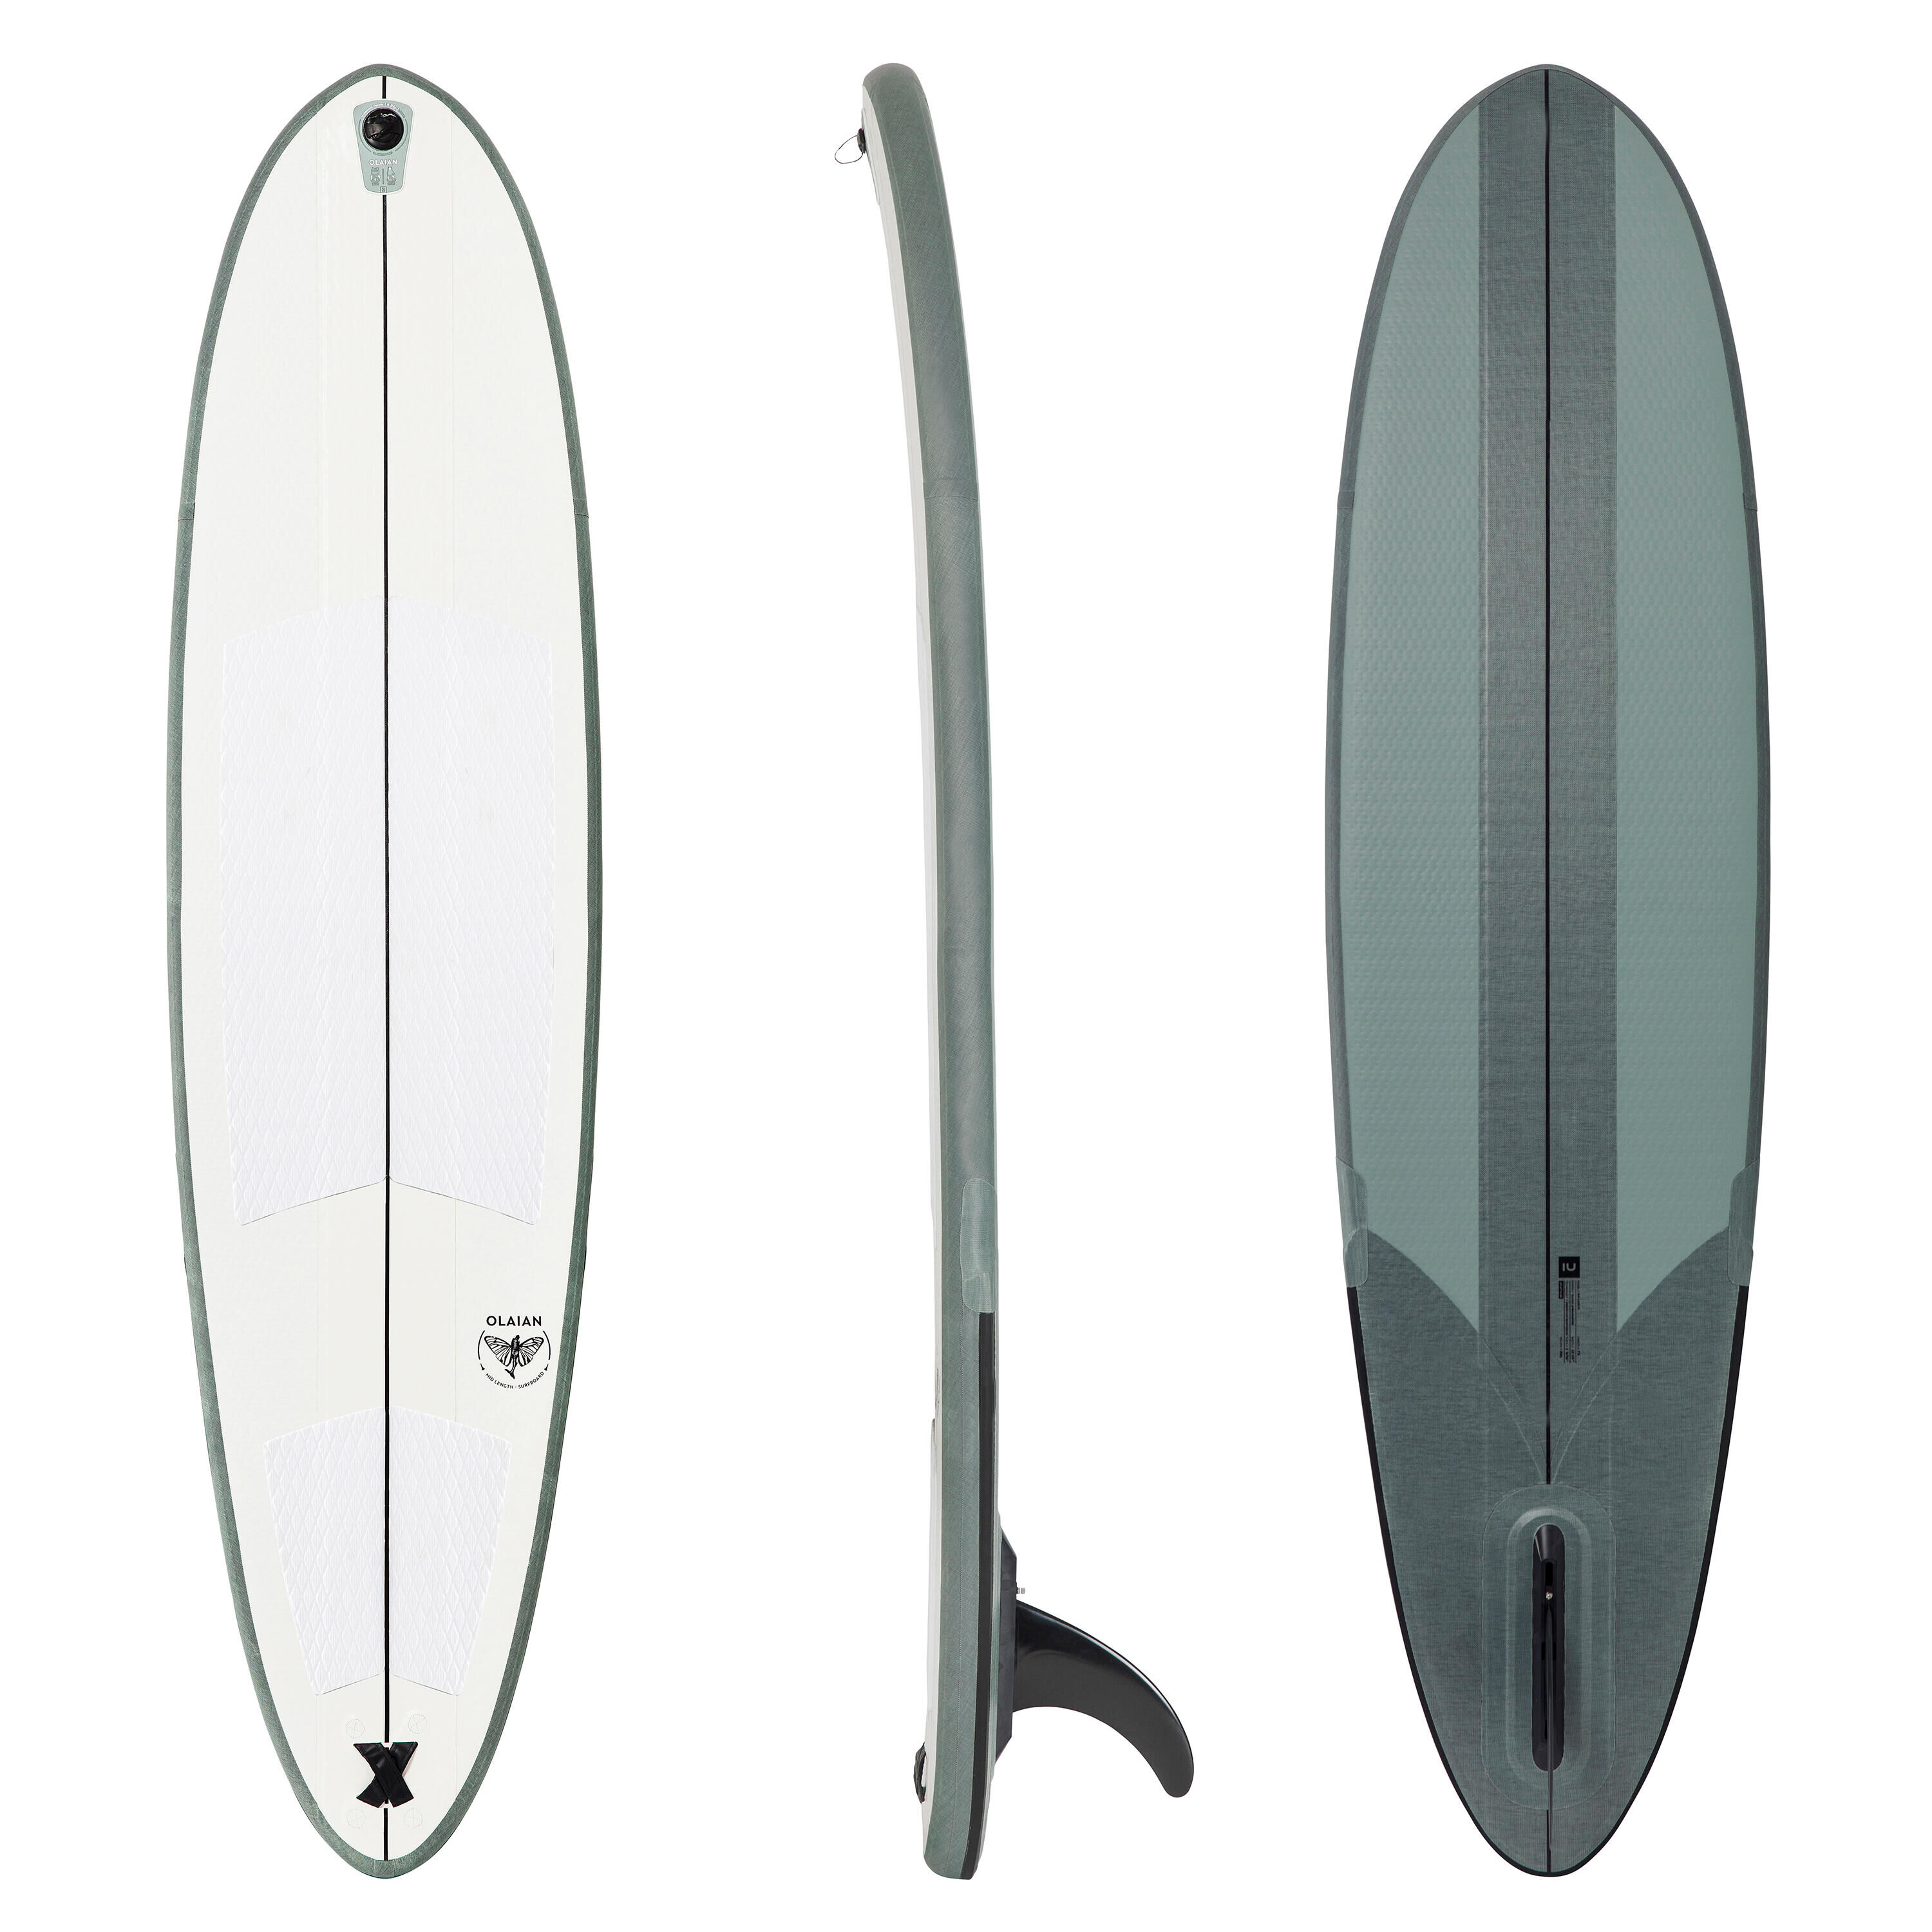 OLAIAN Compact Inflatable SURFBOARD 500 7'6" (without pump or leash)